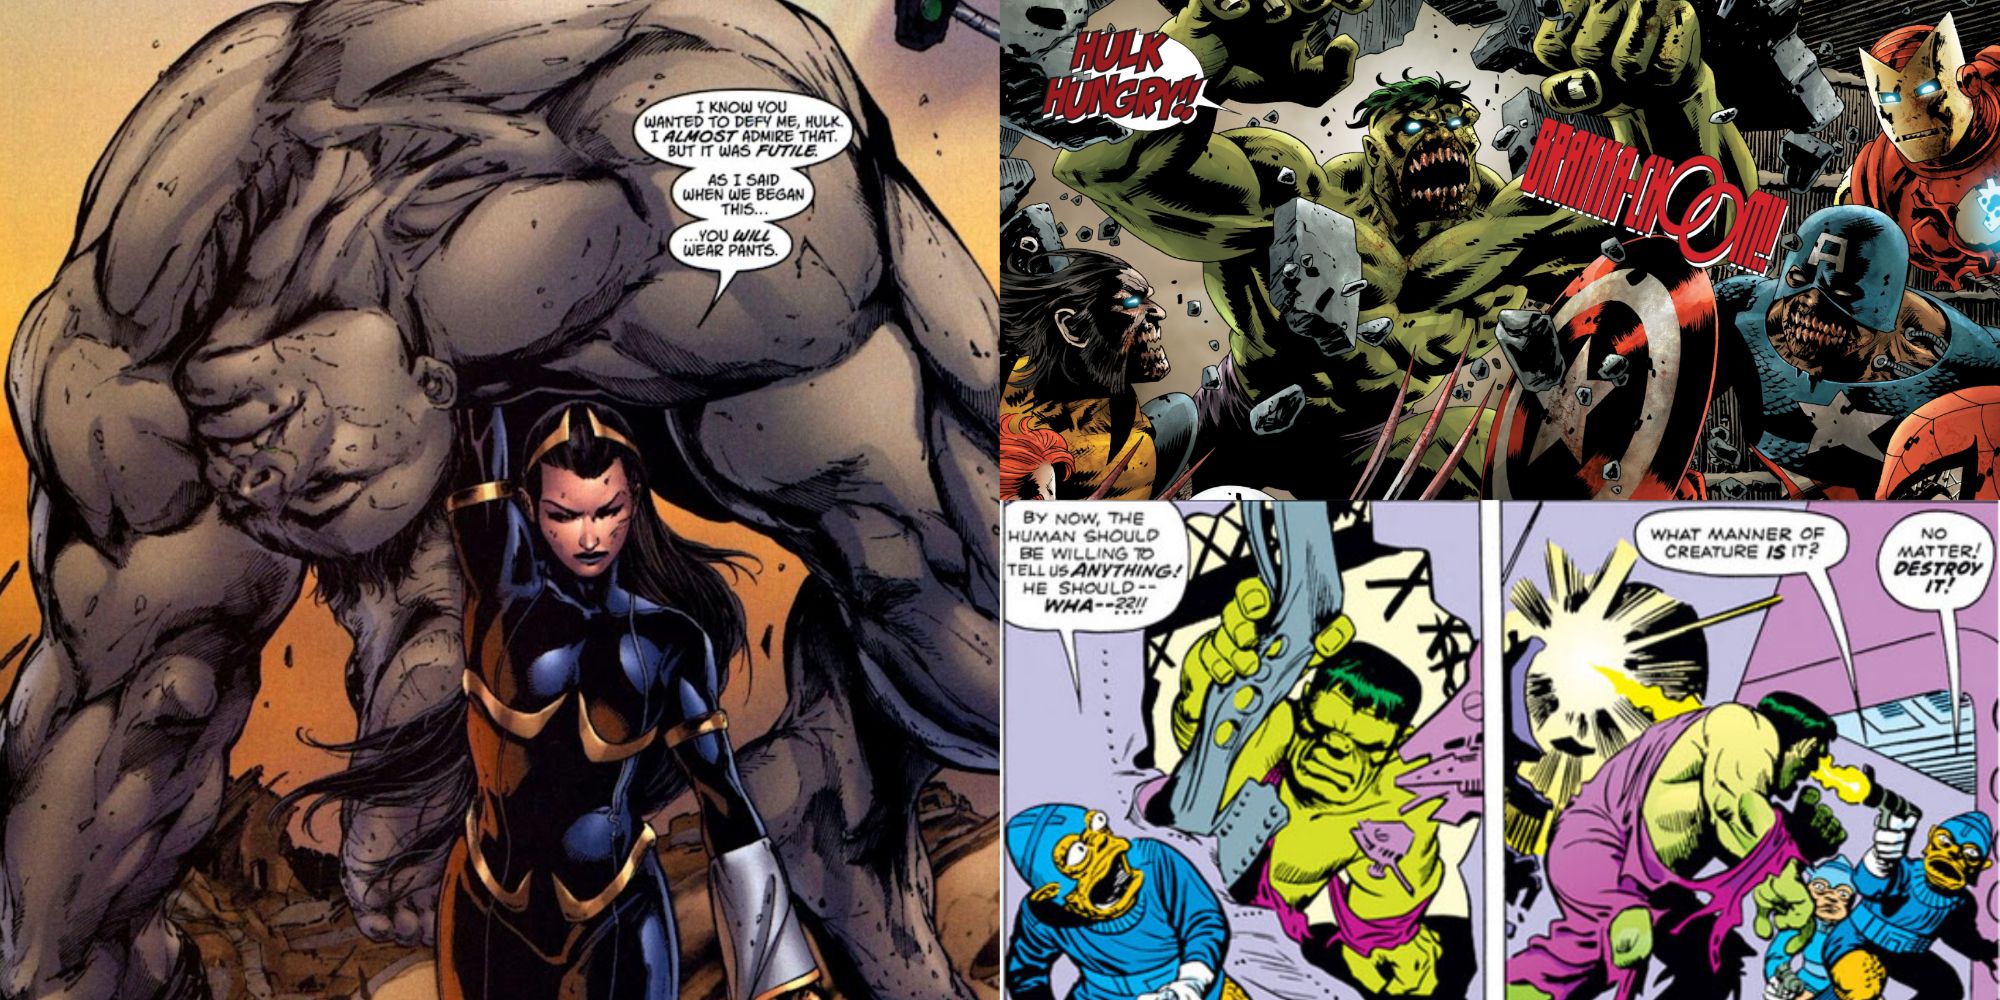 Ultimate, Zombie, and 616 Hulk from Marvel Comics